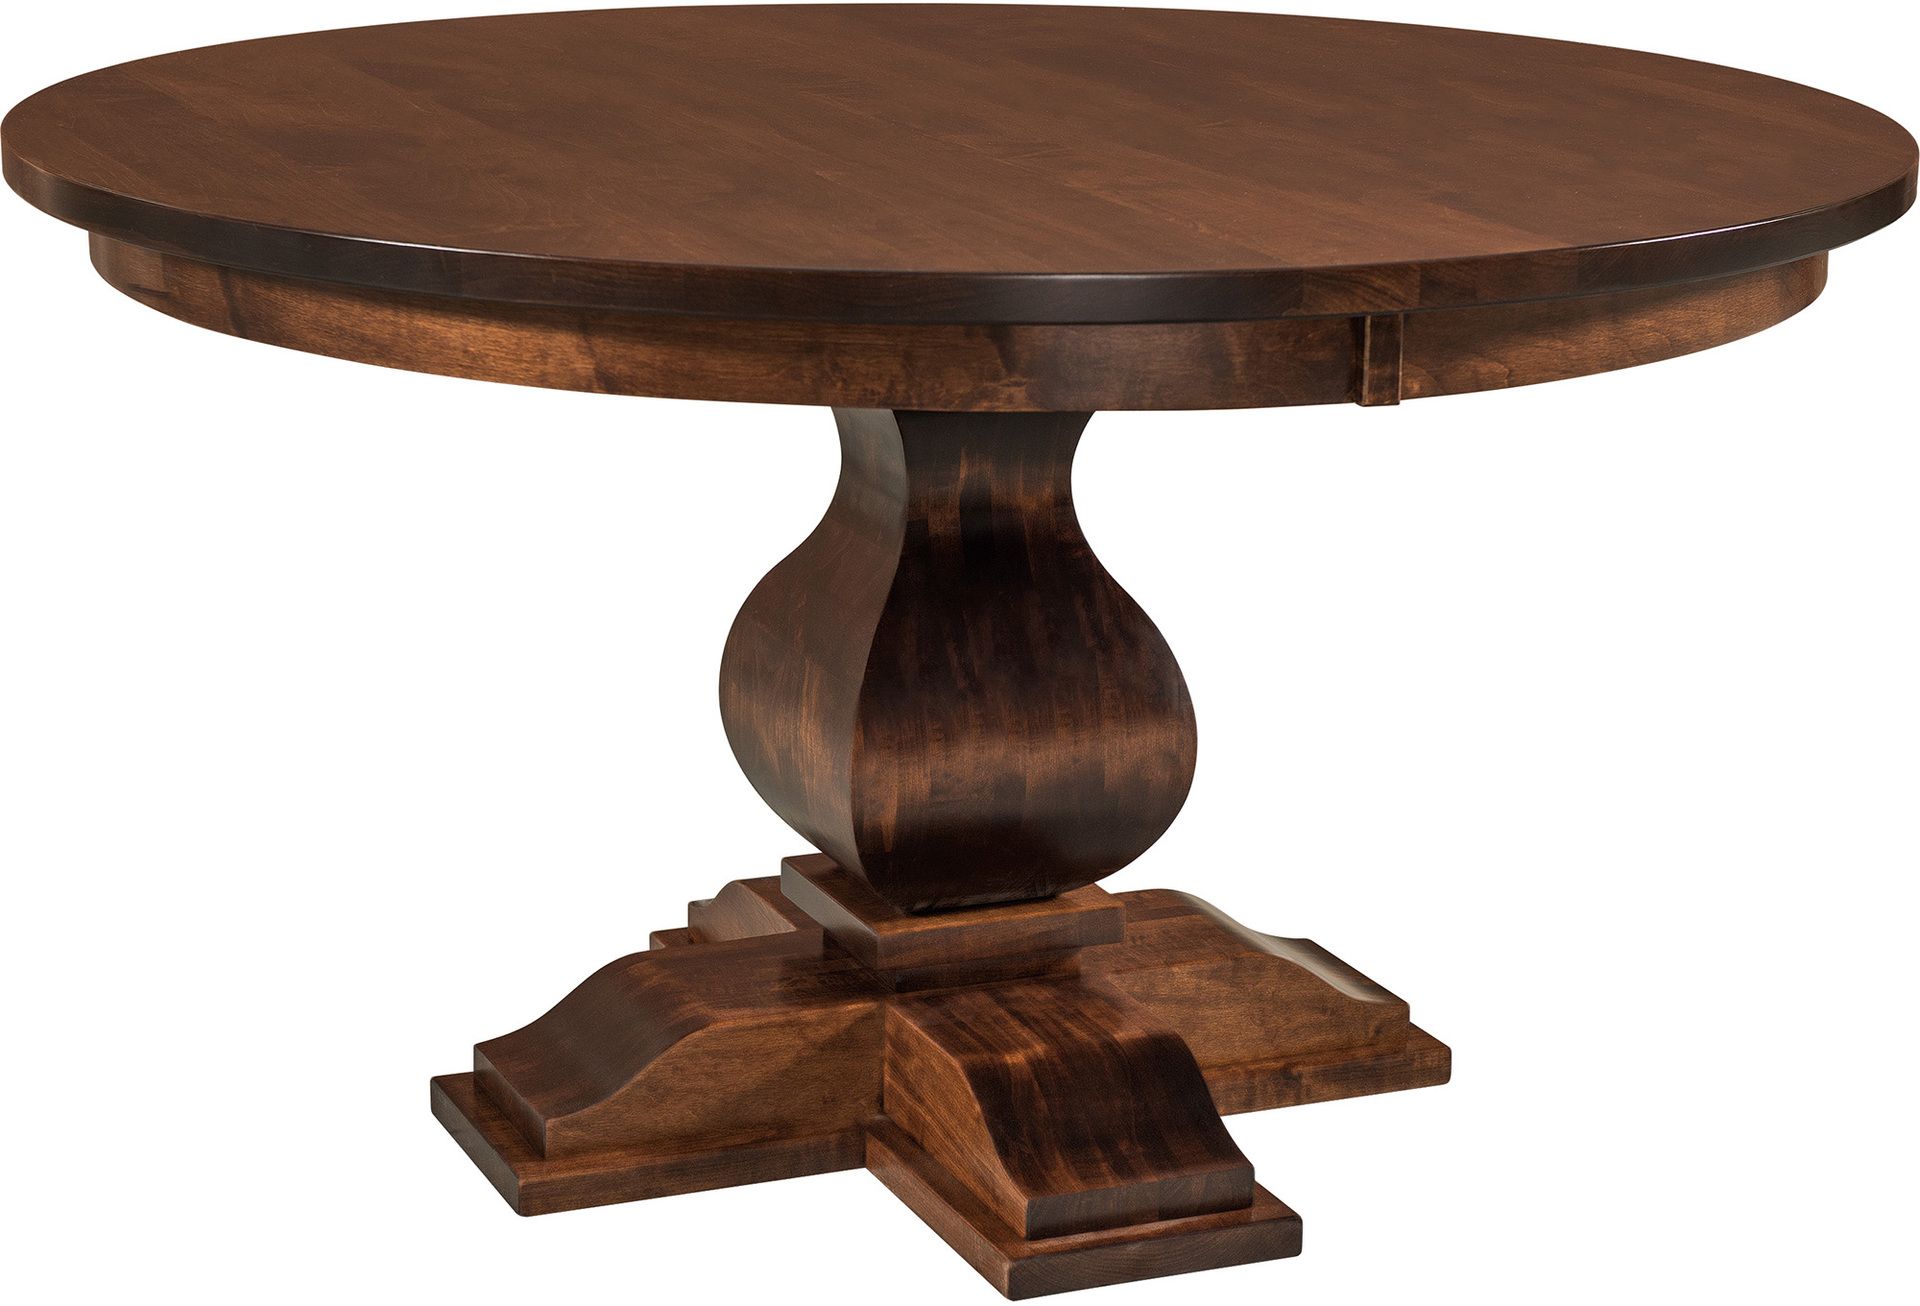 Pedestal On A Dining Room Table